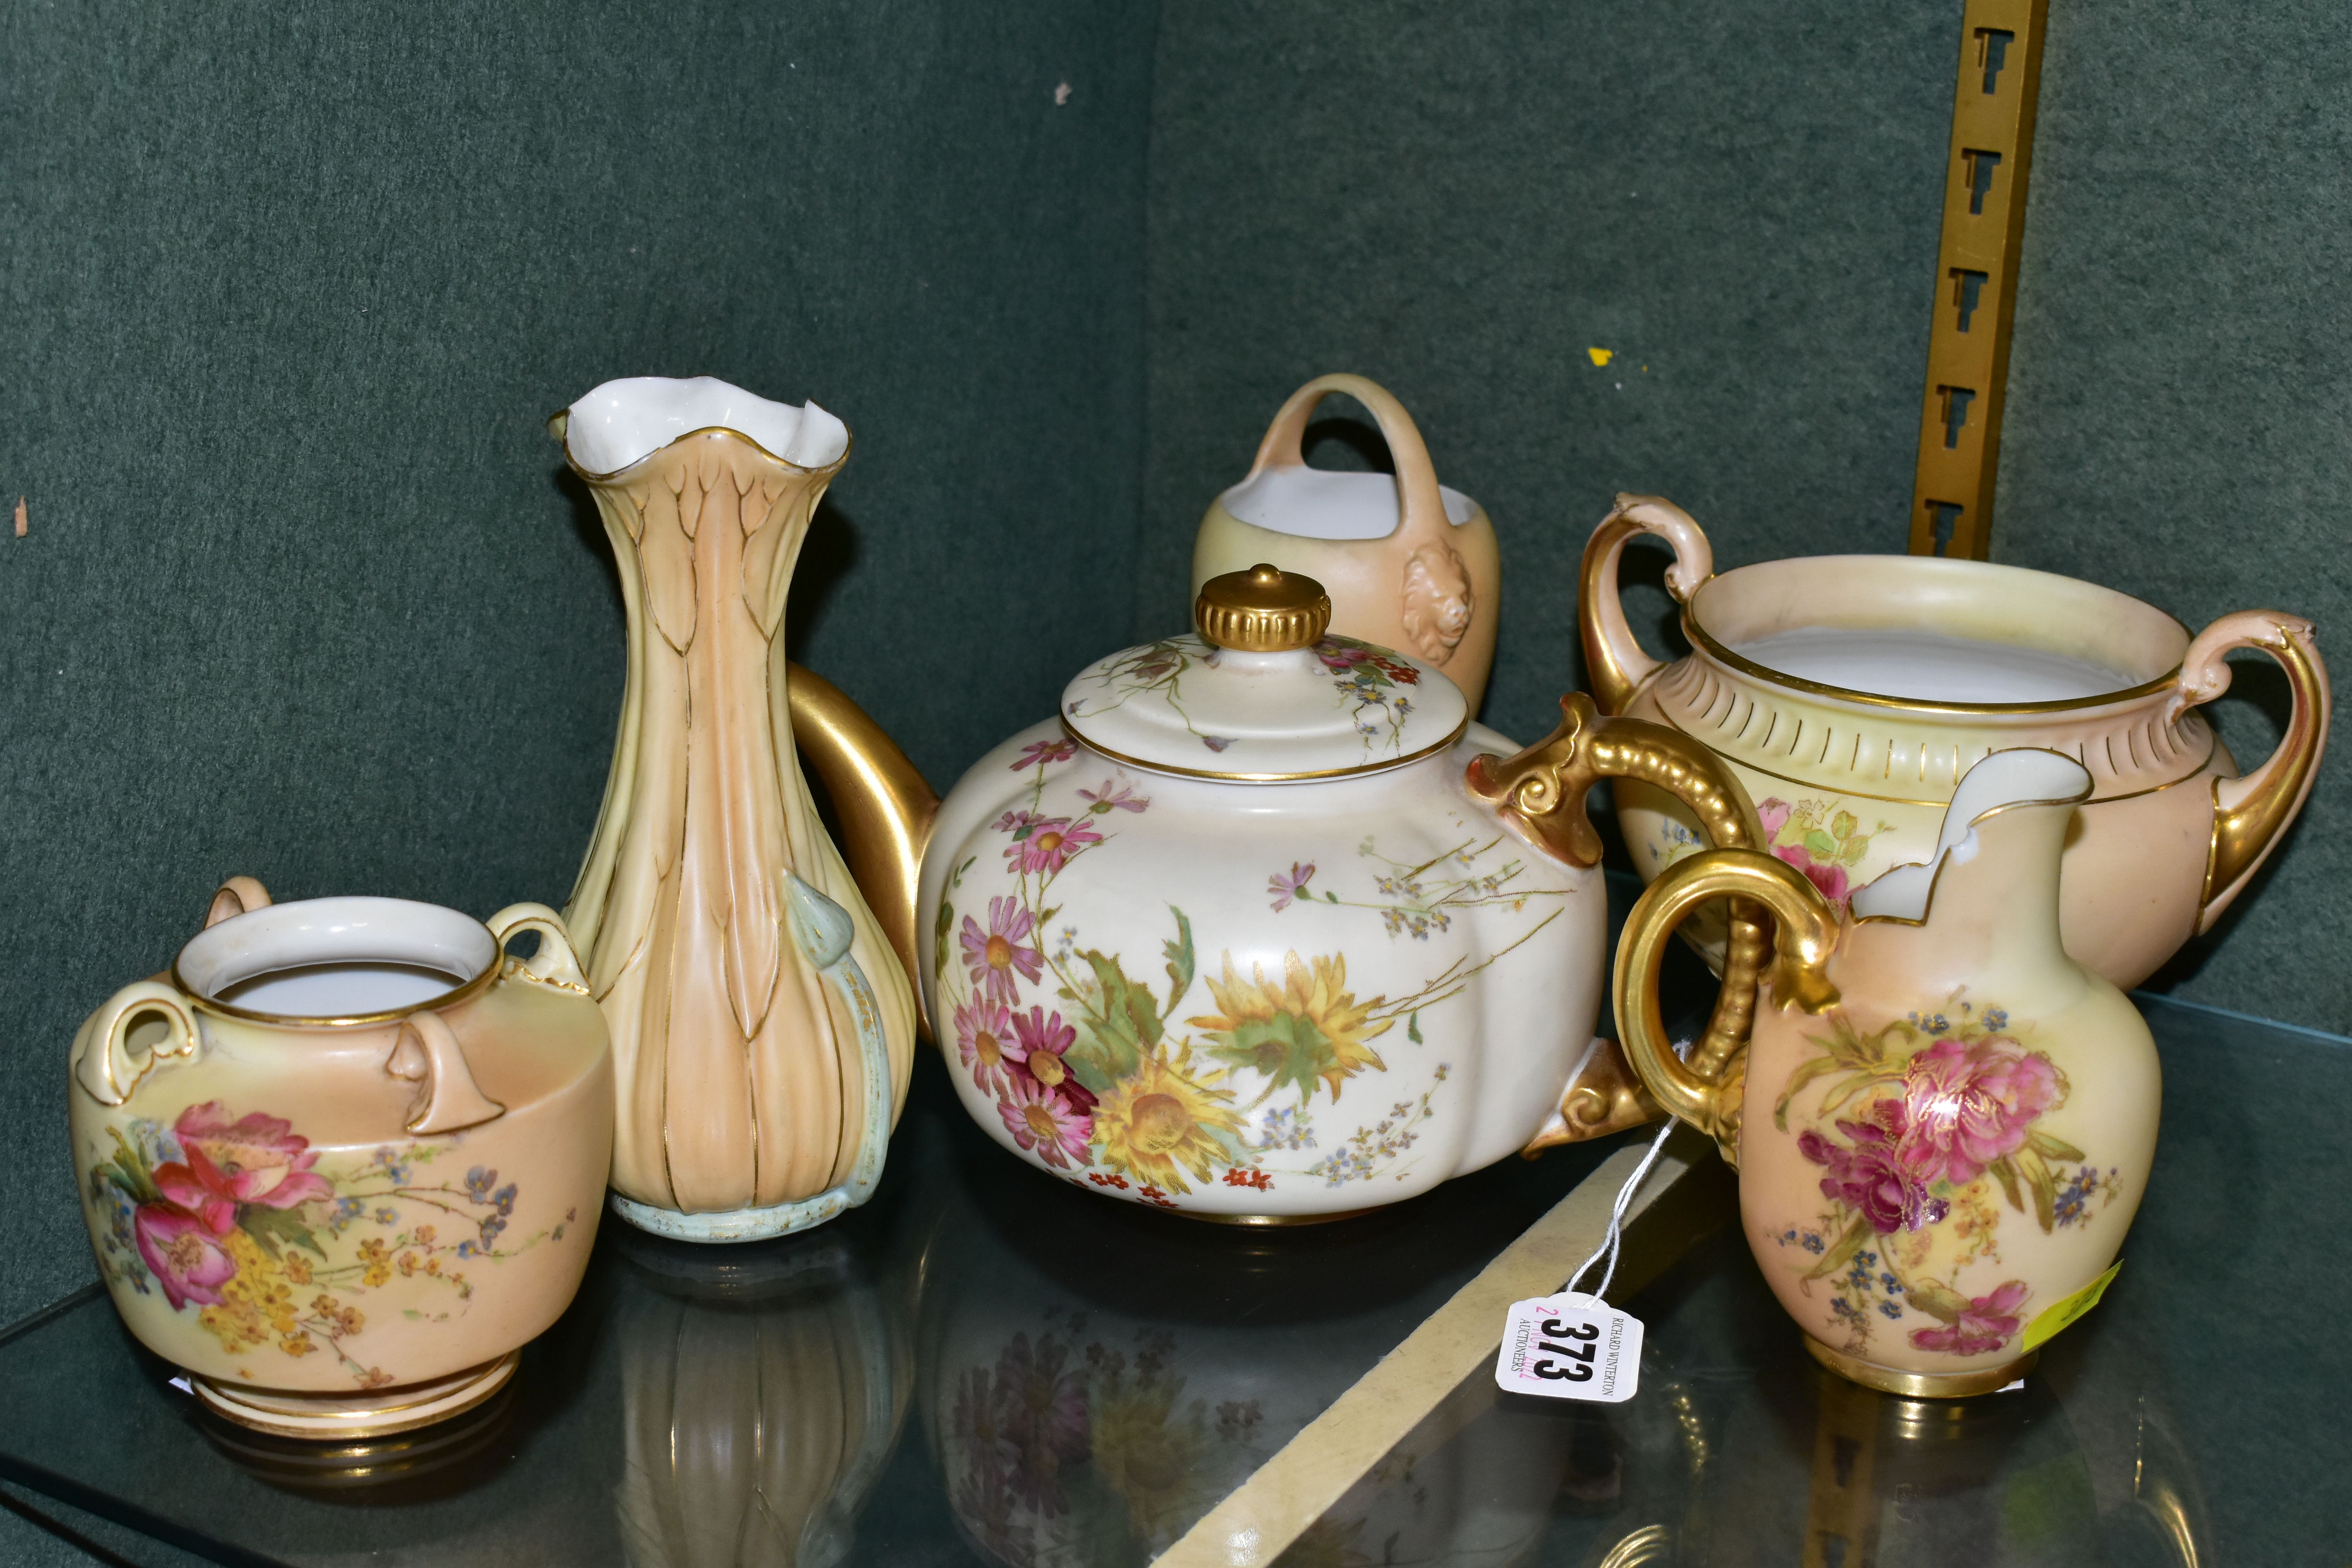 SIX PIECES OF ROYAL WORCESTER BLUSH IVORY PORCELAIN, comprising a teapot printed and tinted with